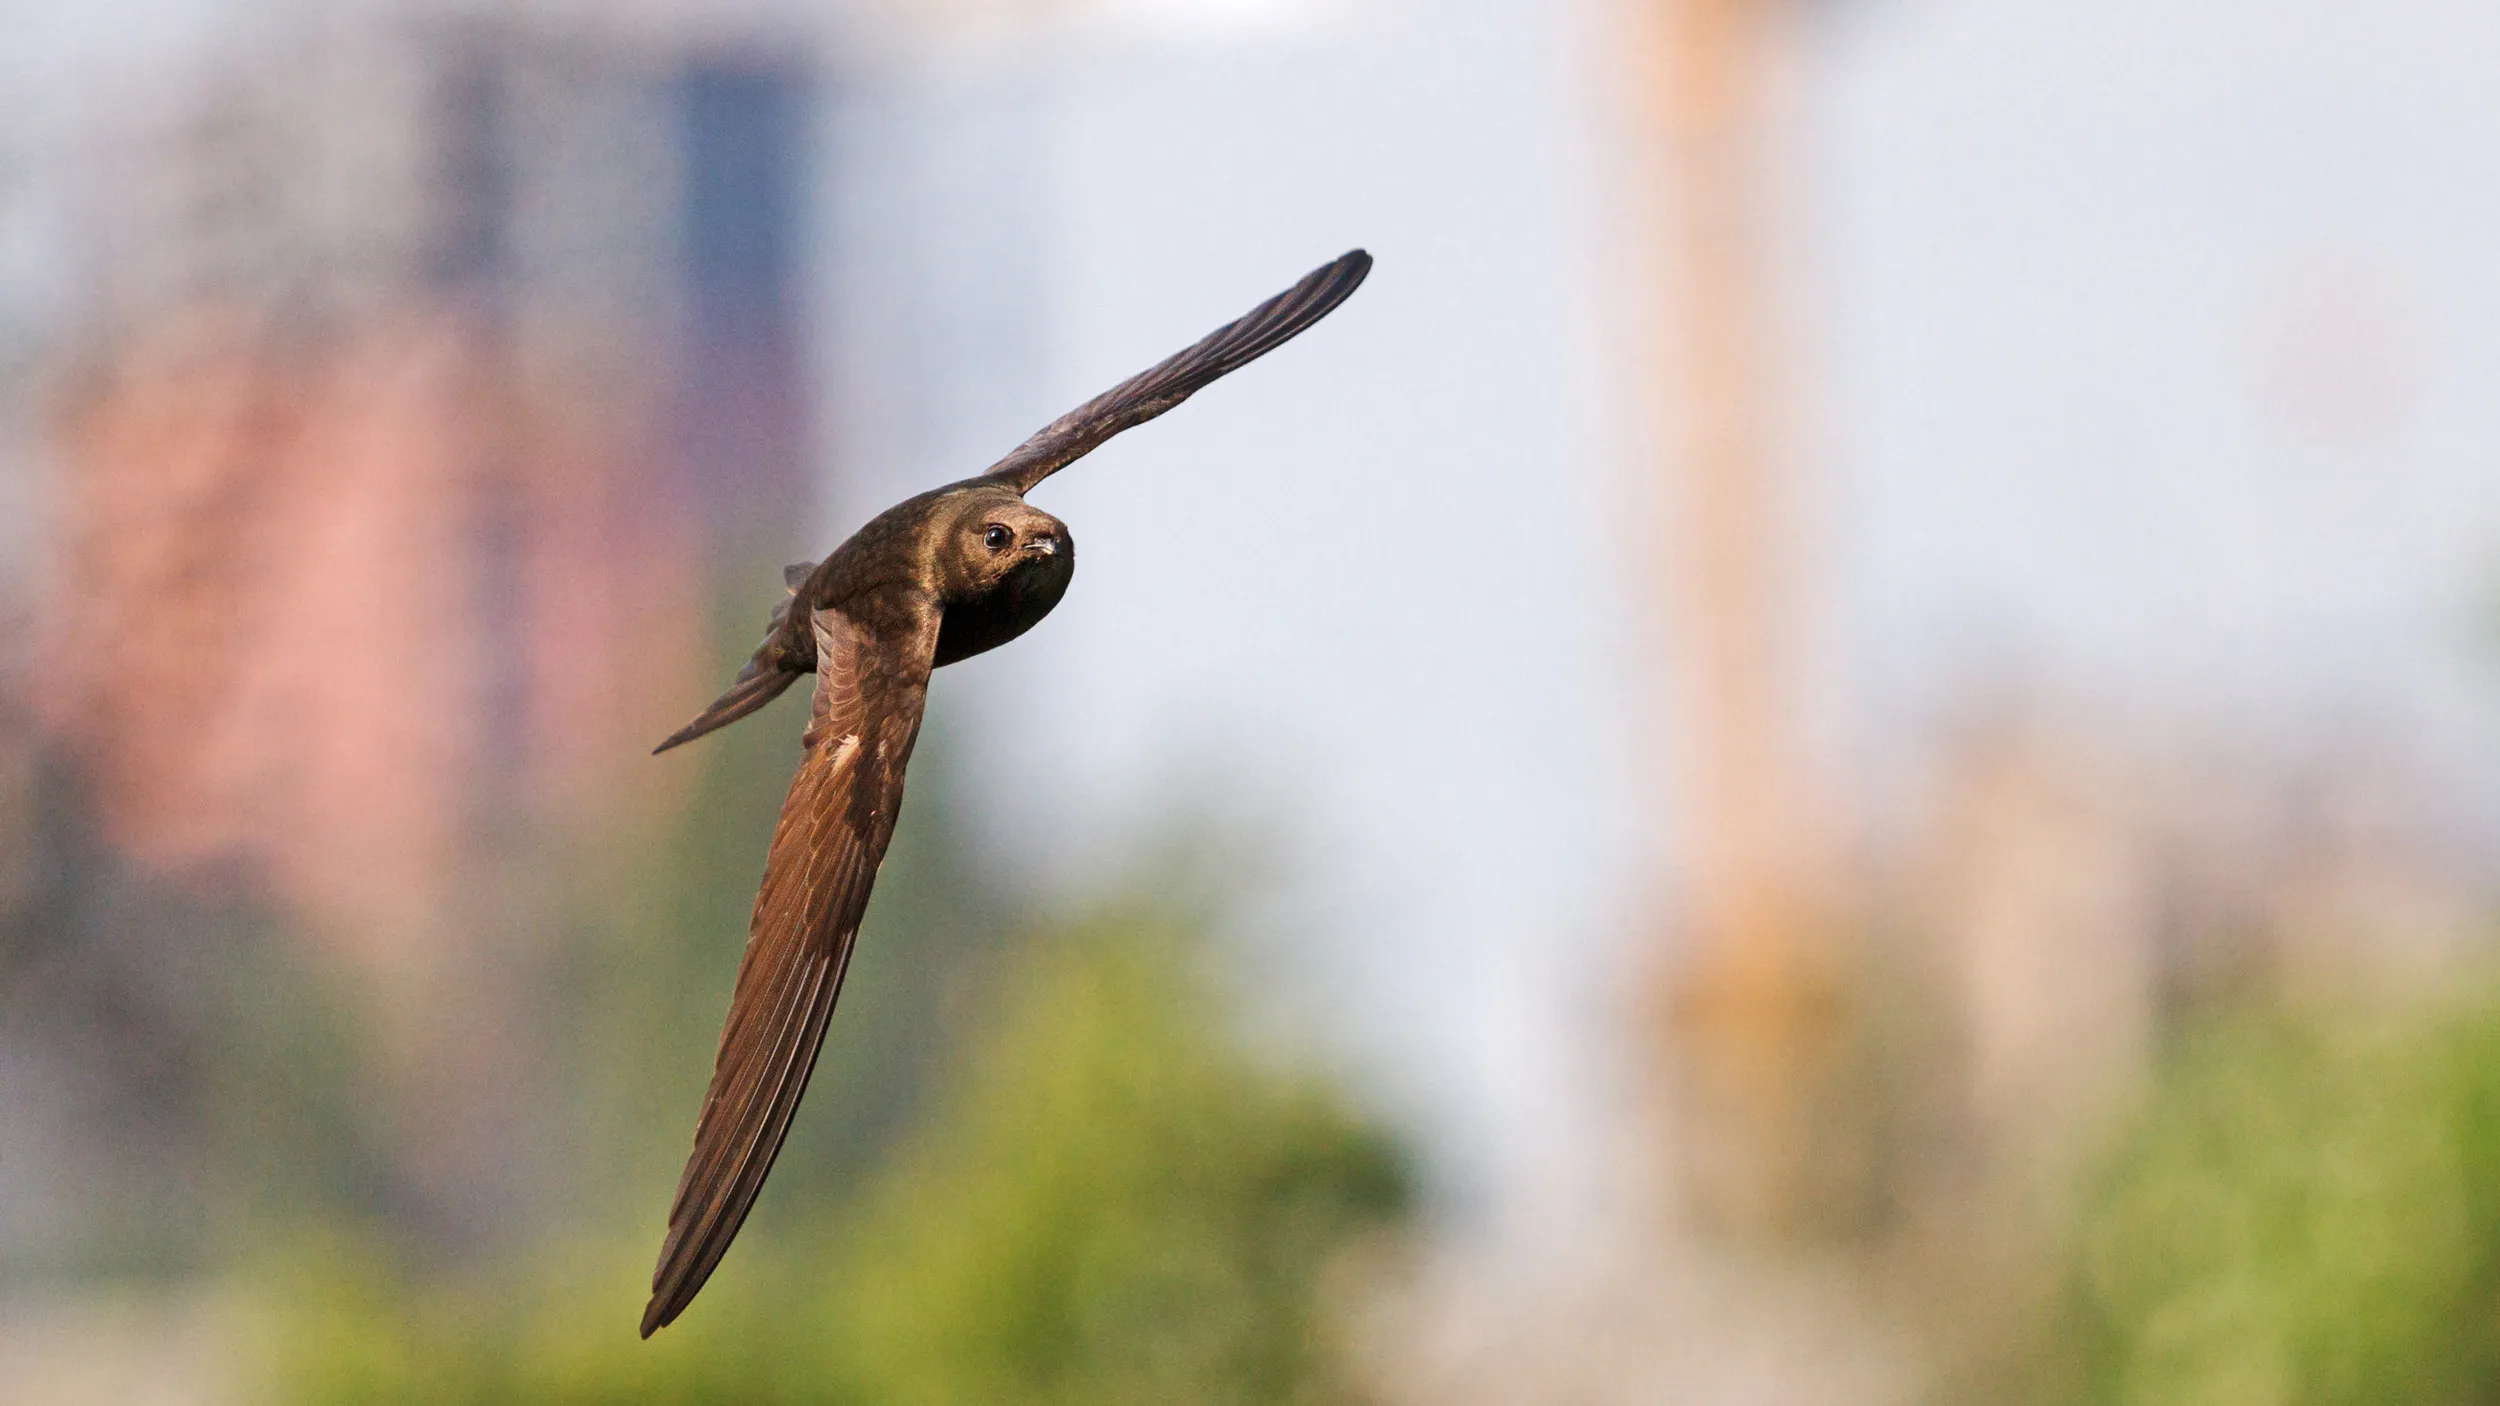 A Swift soaring in an urban environment.